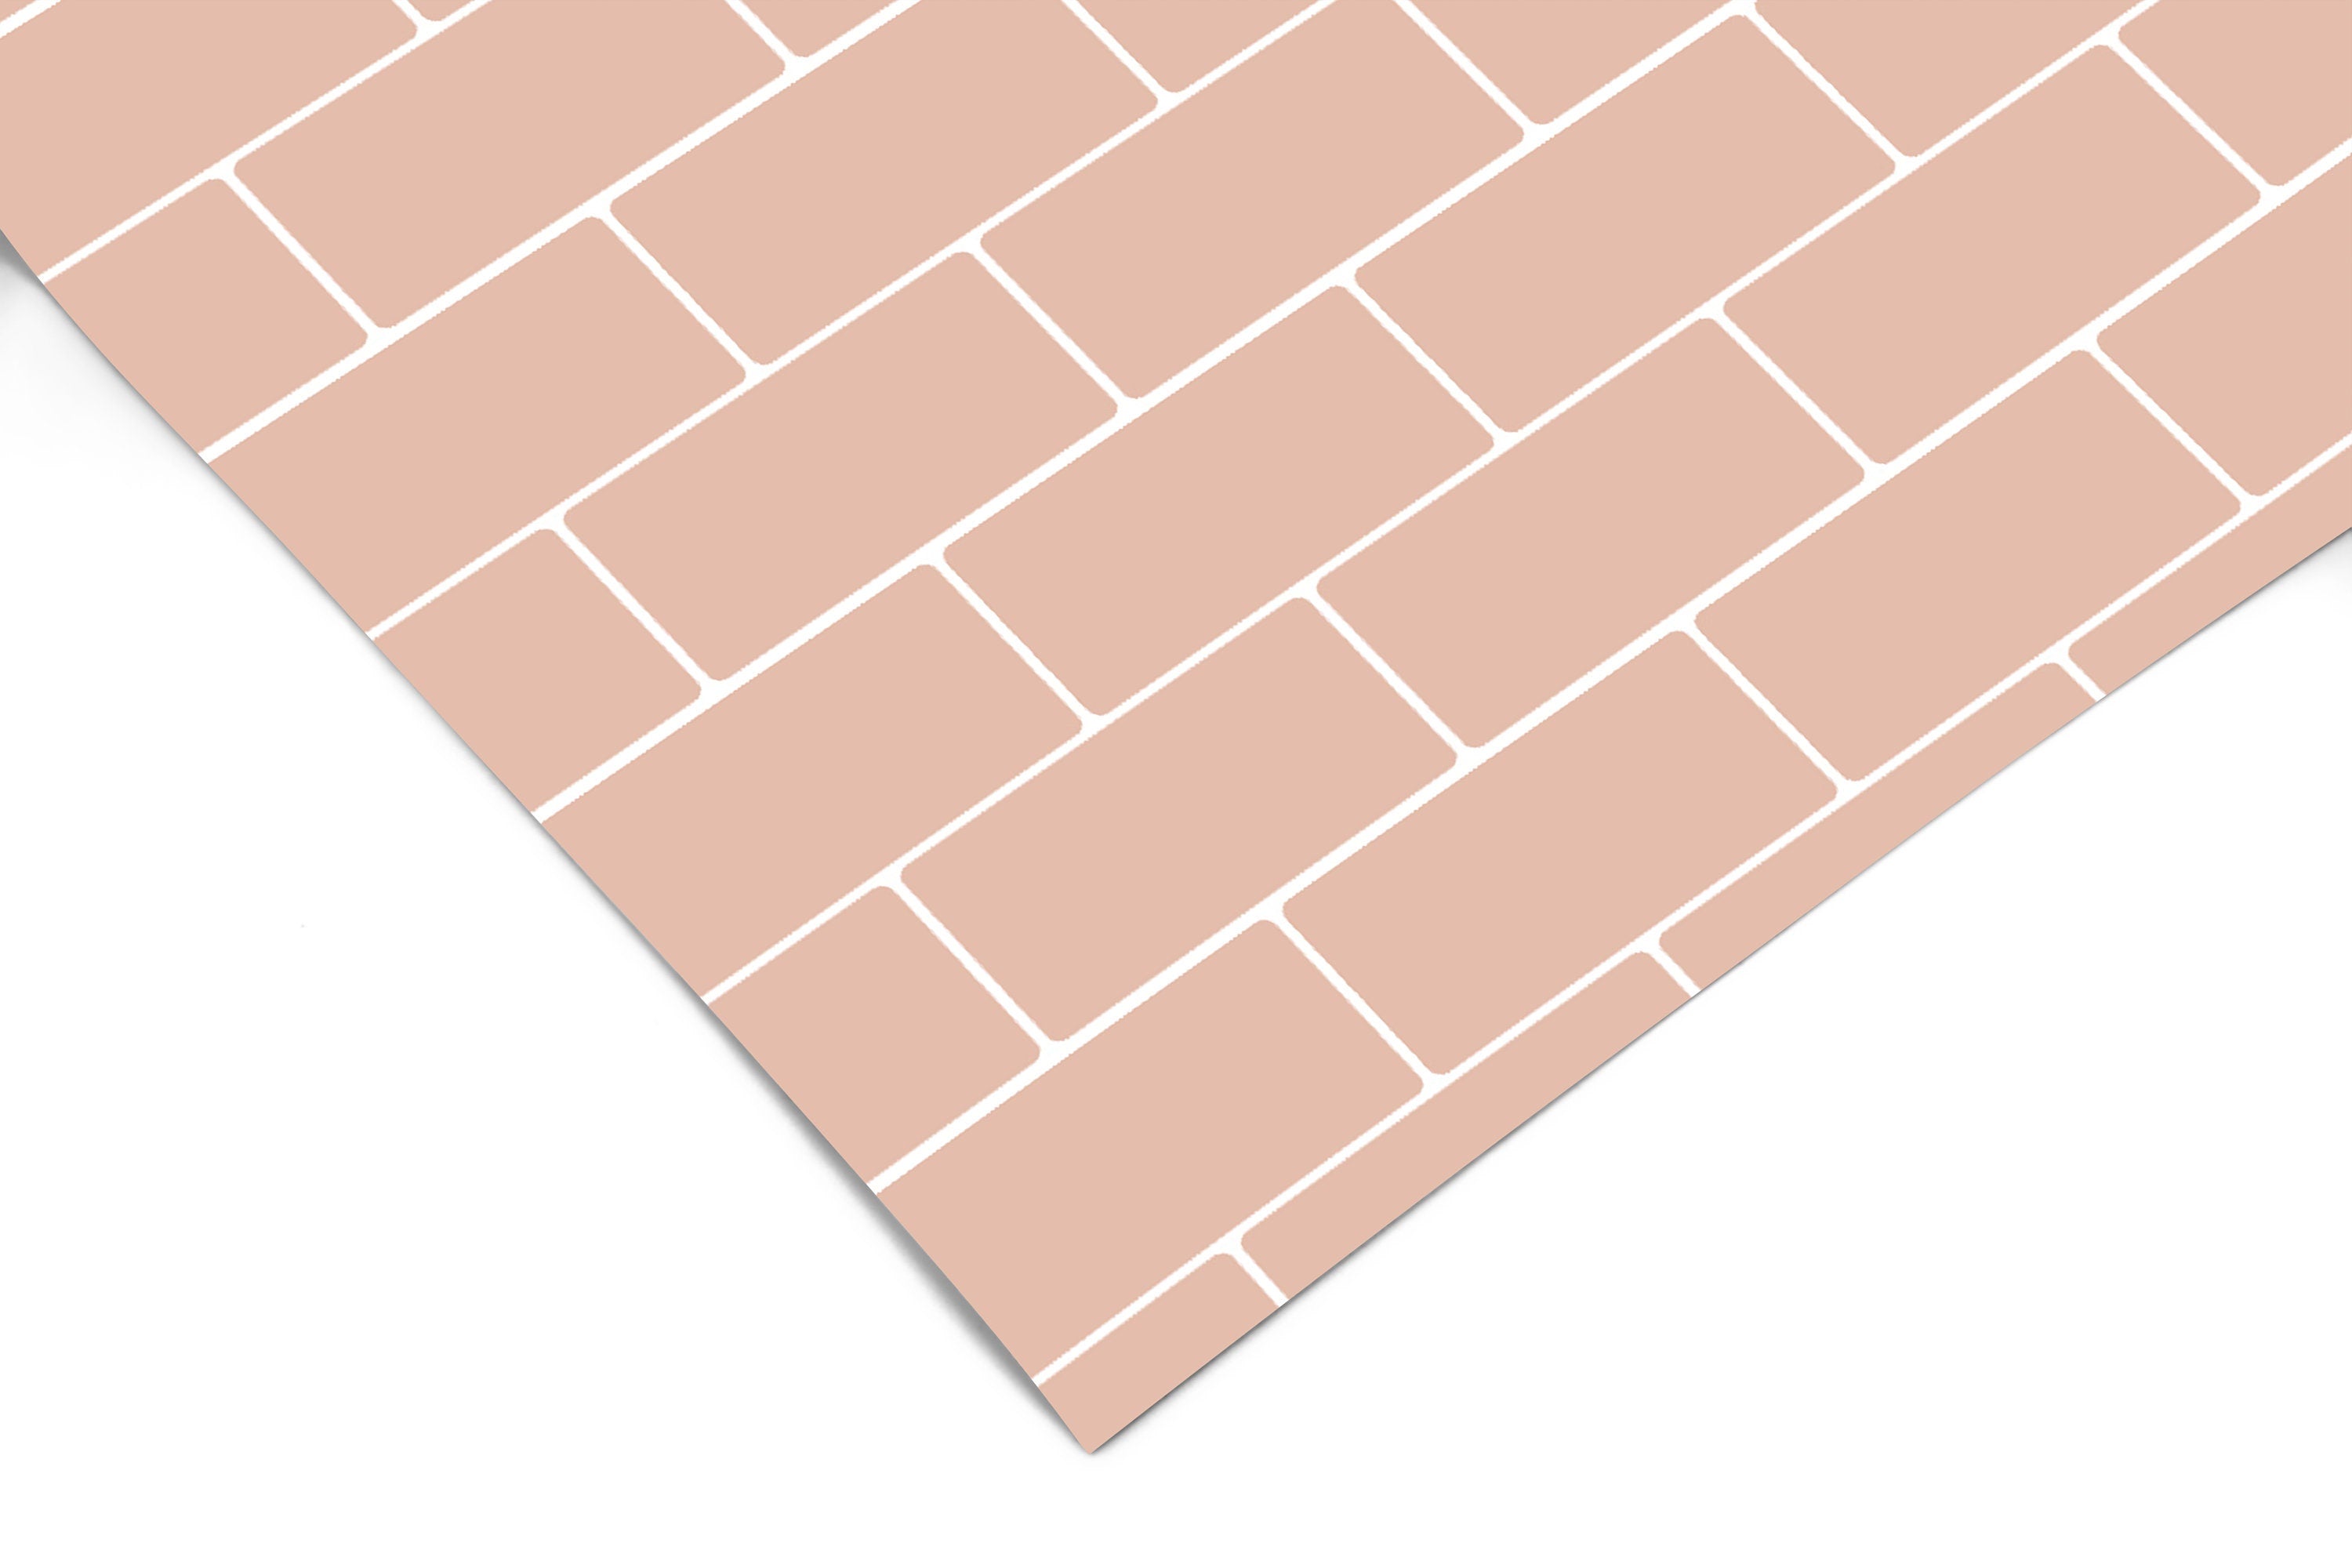 Pale Pink Subway Tile Contact Paper | Peel And Stick Wallpaper | Removable Wallpaper | Shelf Liner | Drawer Liner | Peel and Stick Paper 691 - JamesAndColors